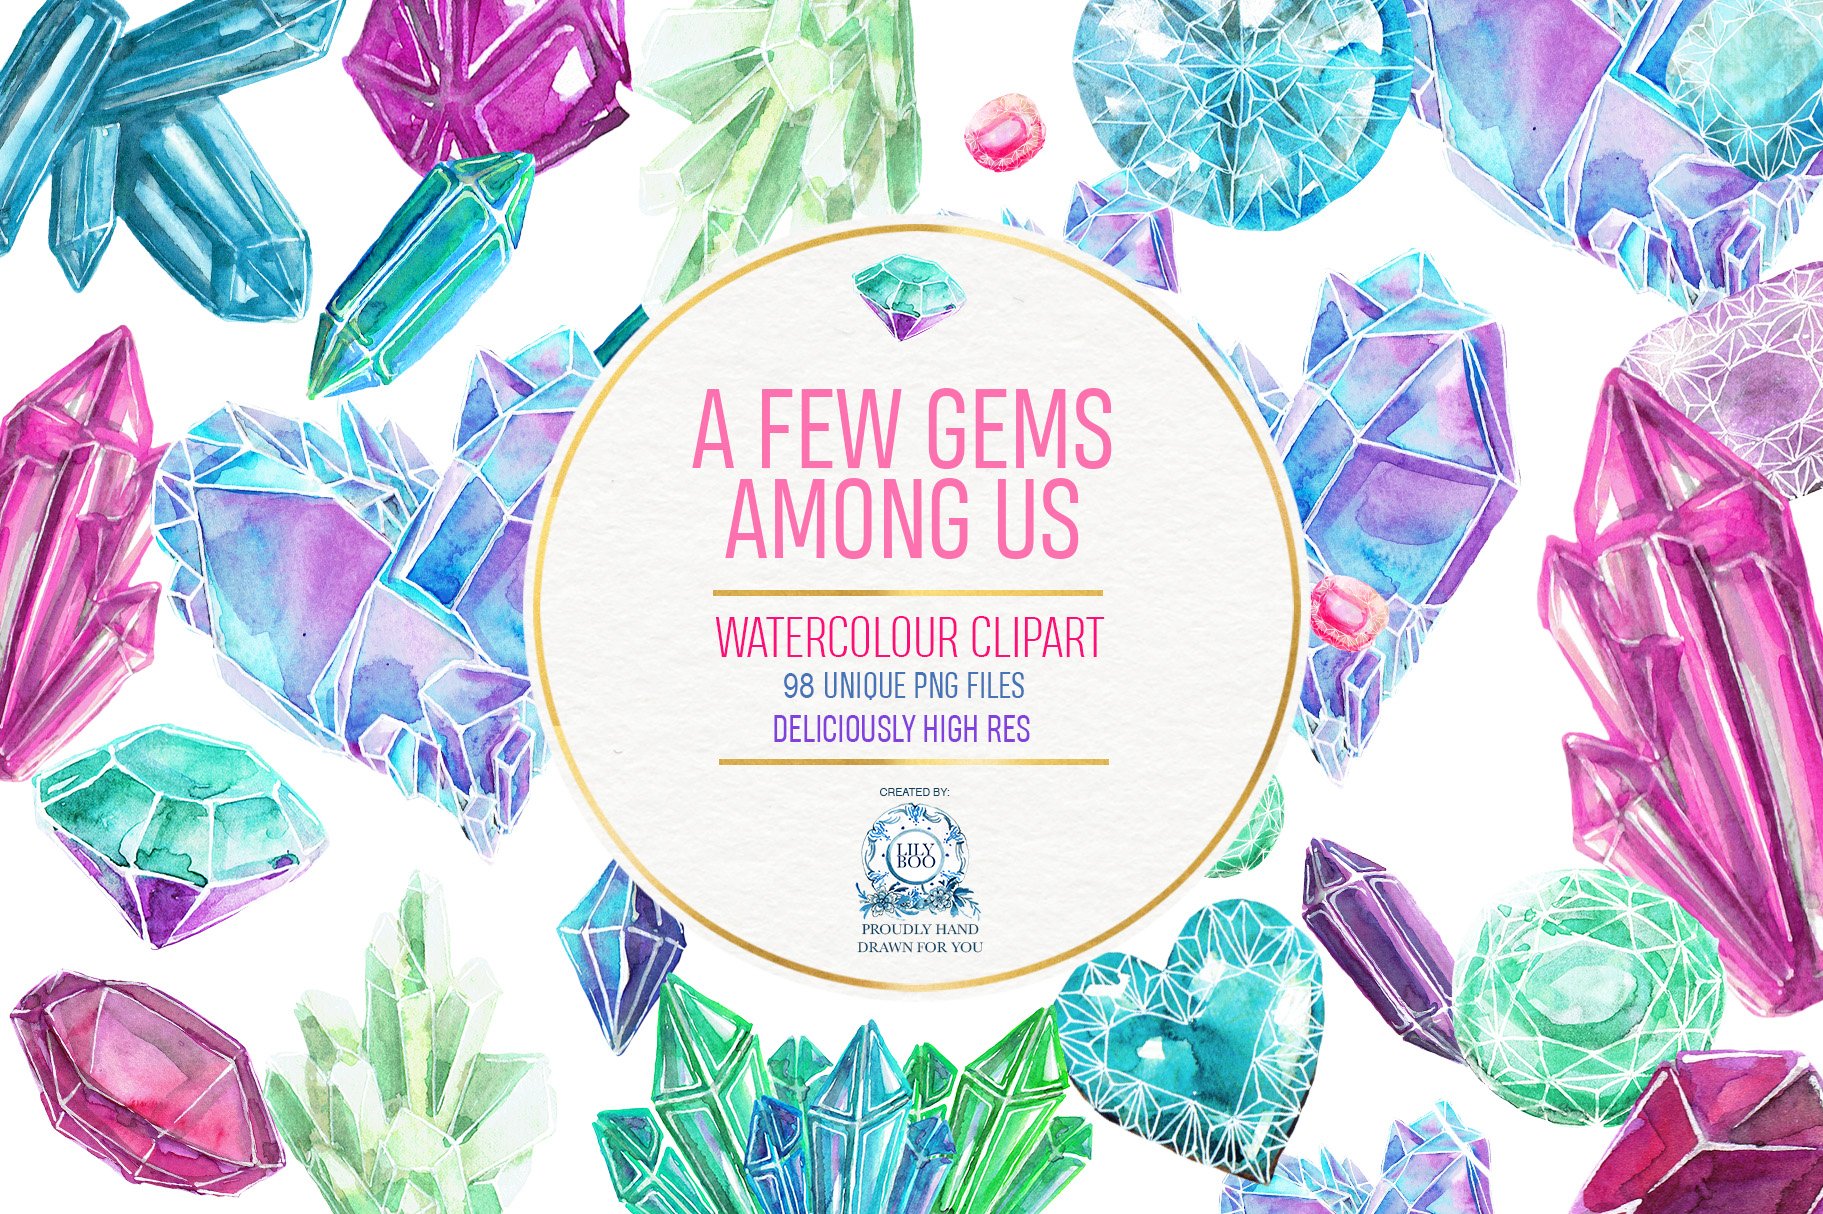 Gemstones: 98 Watercolor Clipart PNG cover image.